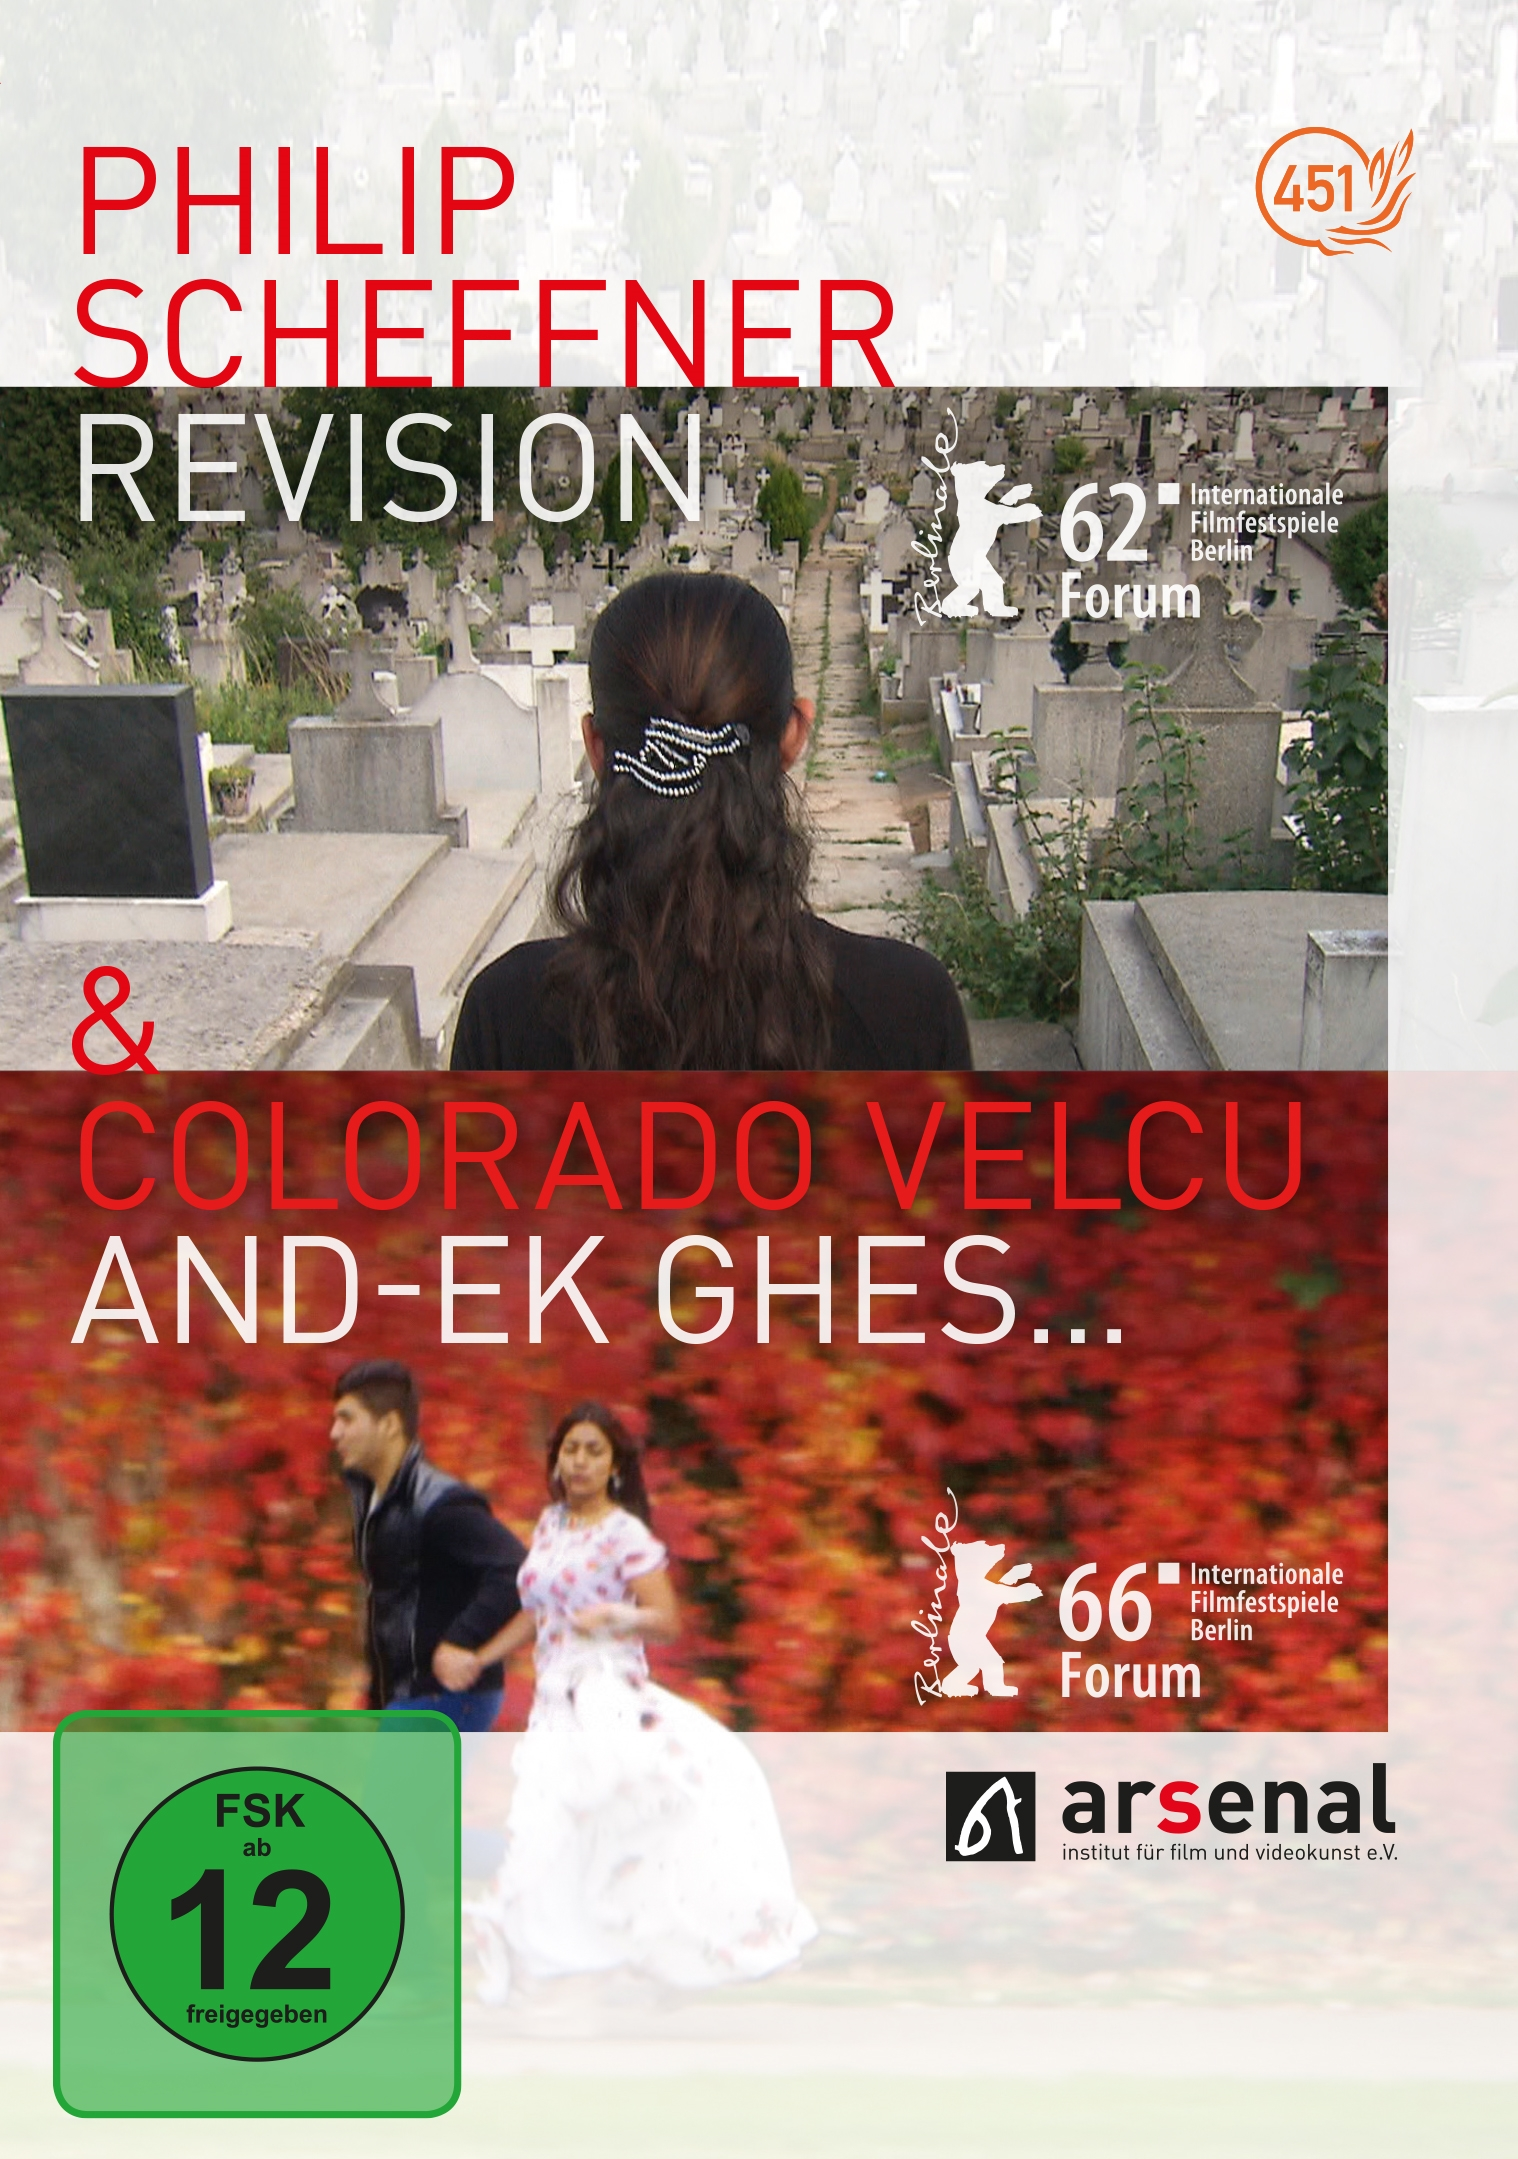 Revision Ghes… And-Ek & DVD